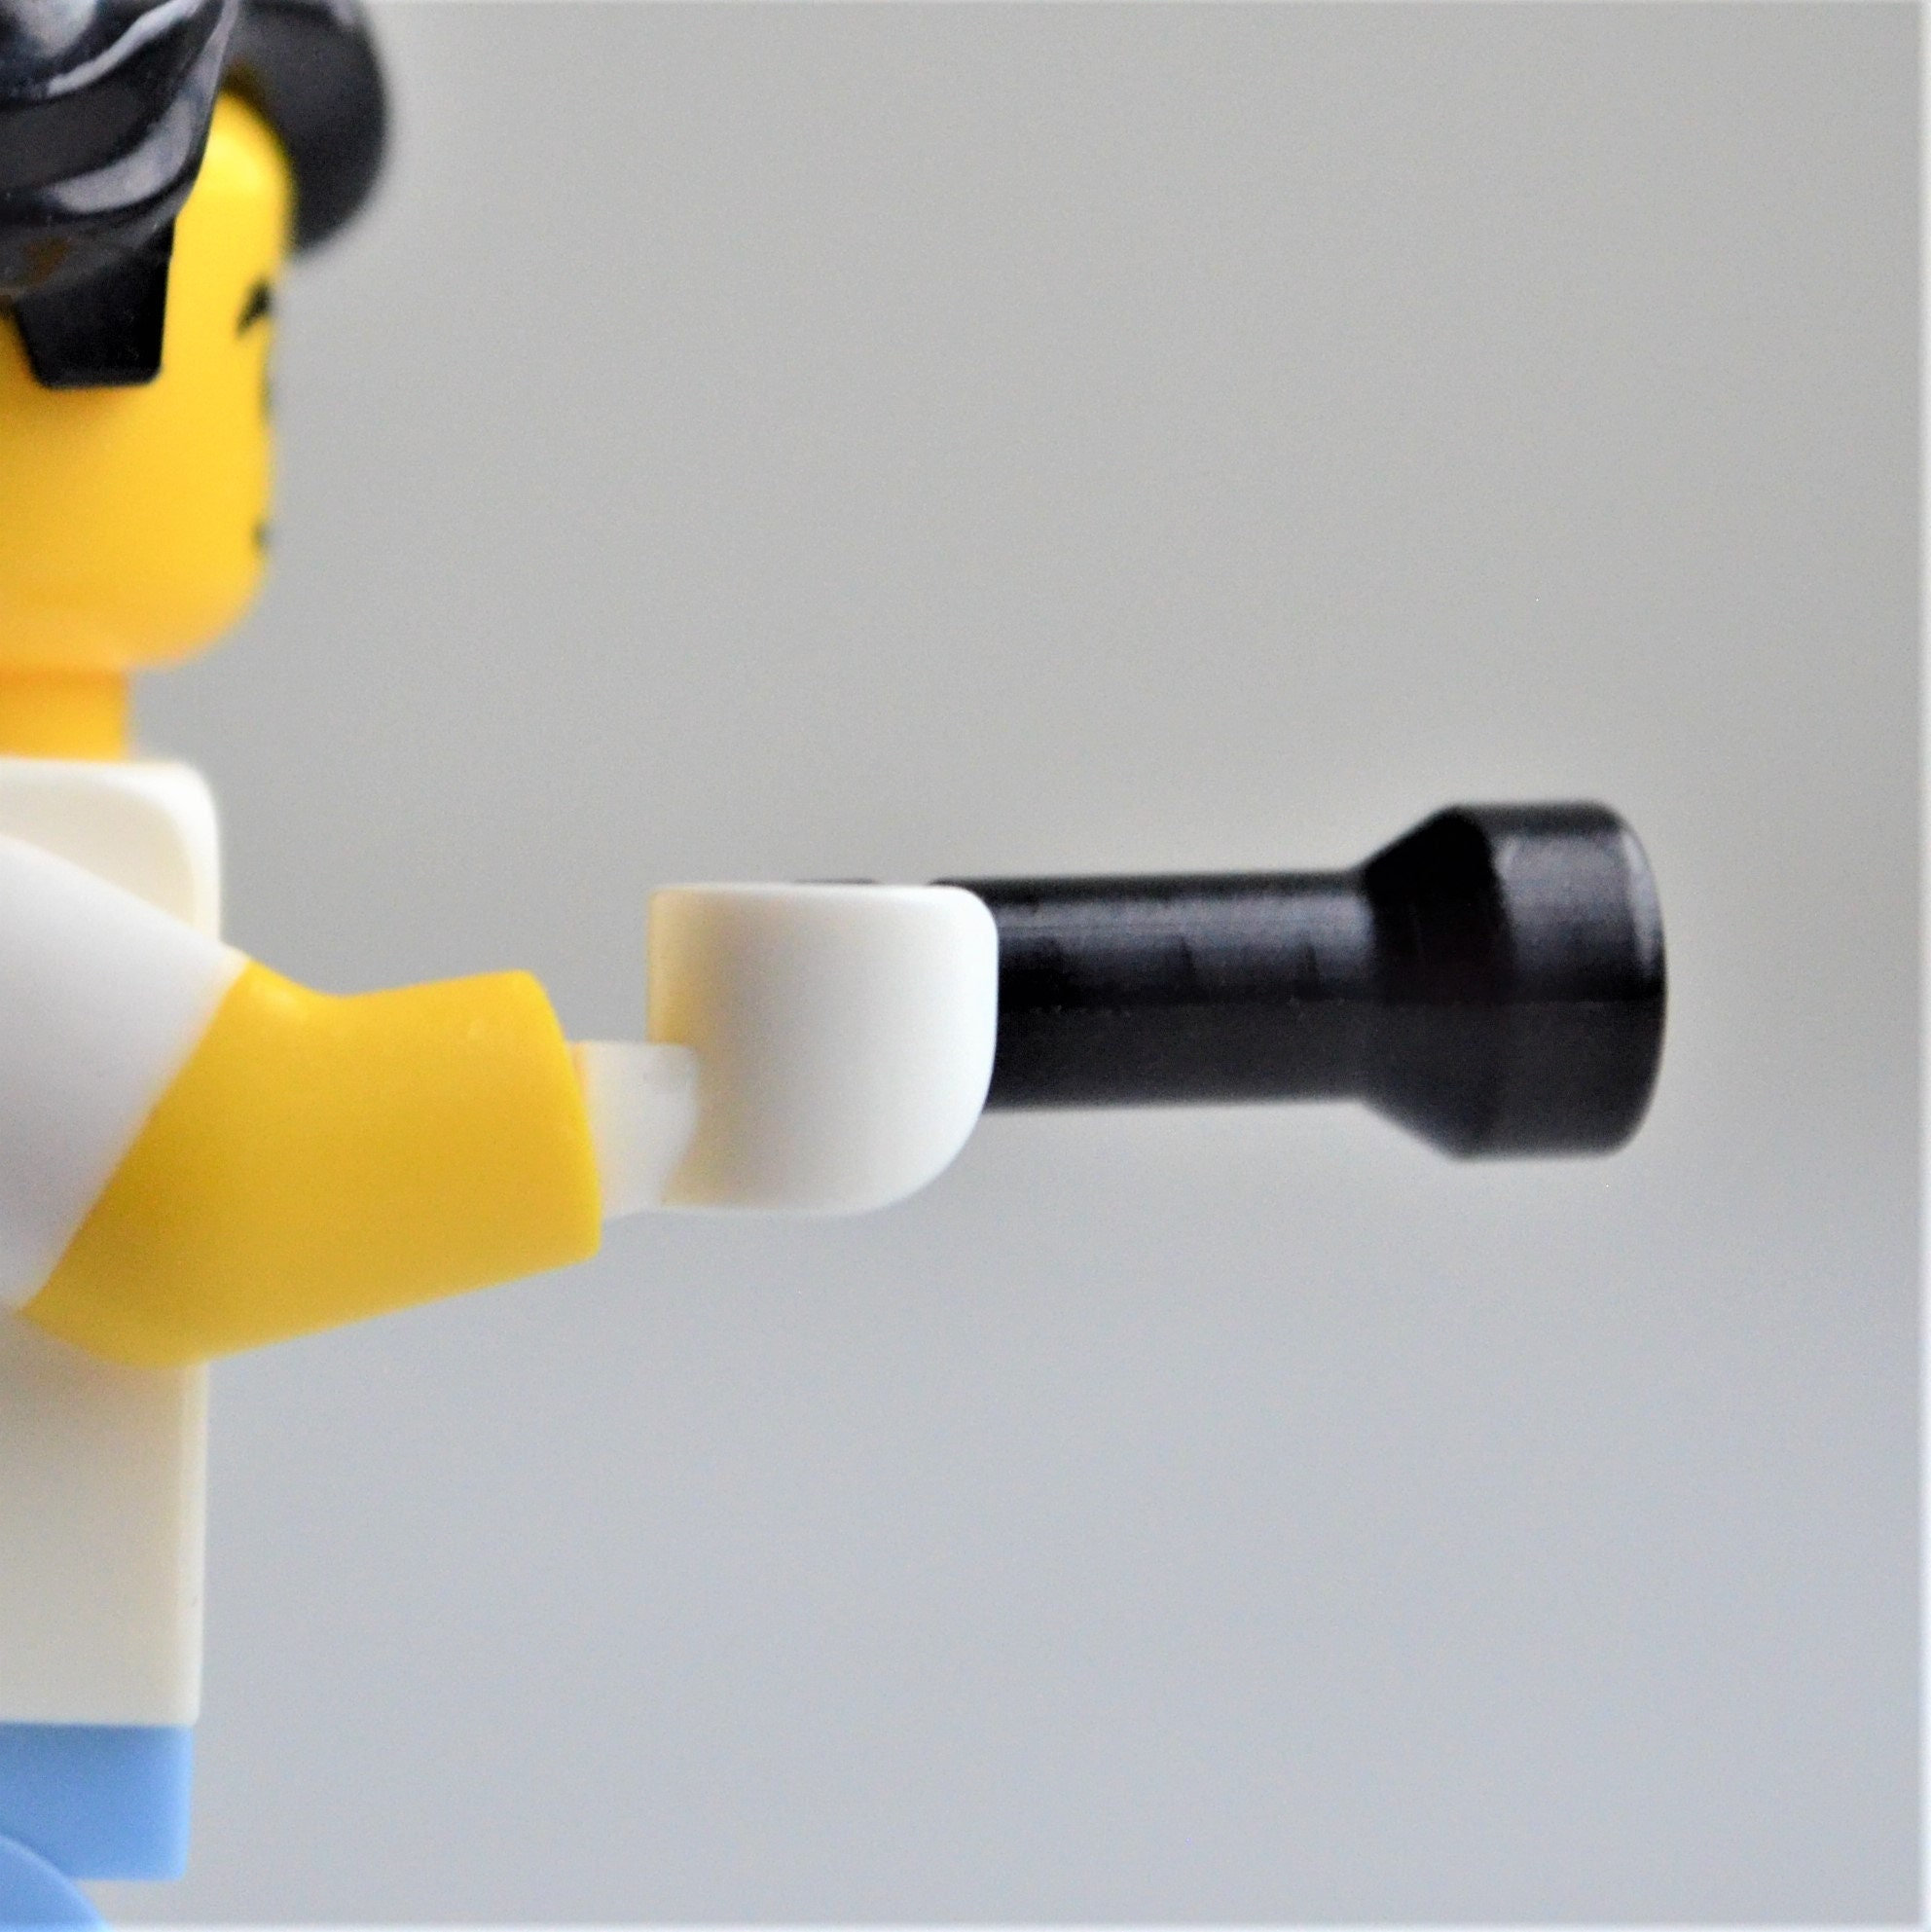 Personnage LEGO - Lampe Torche